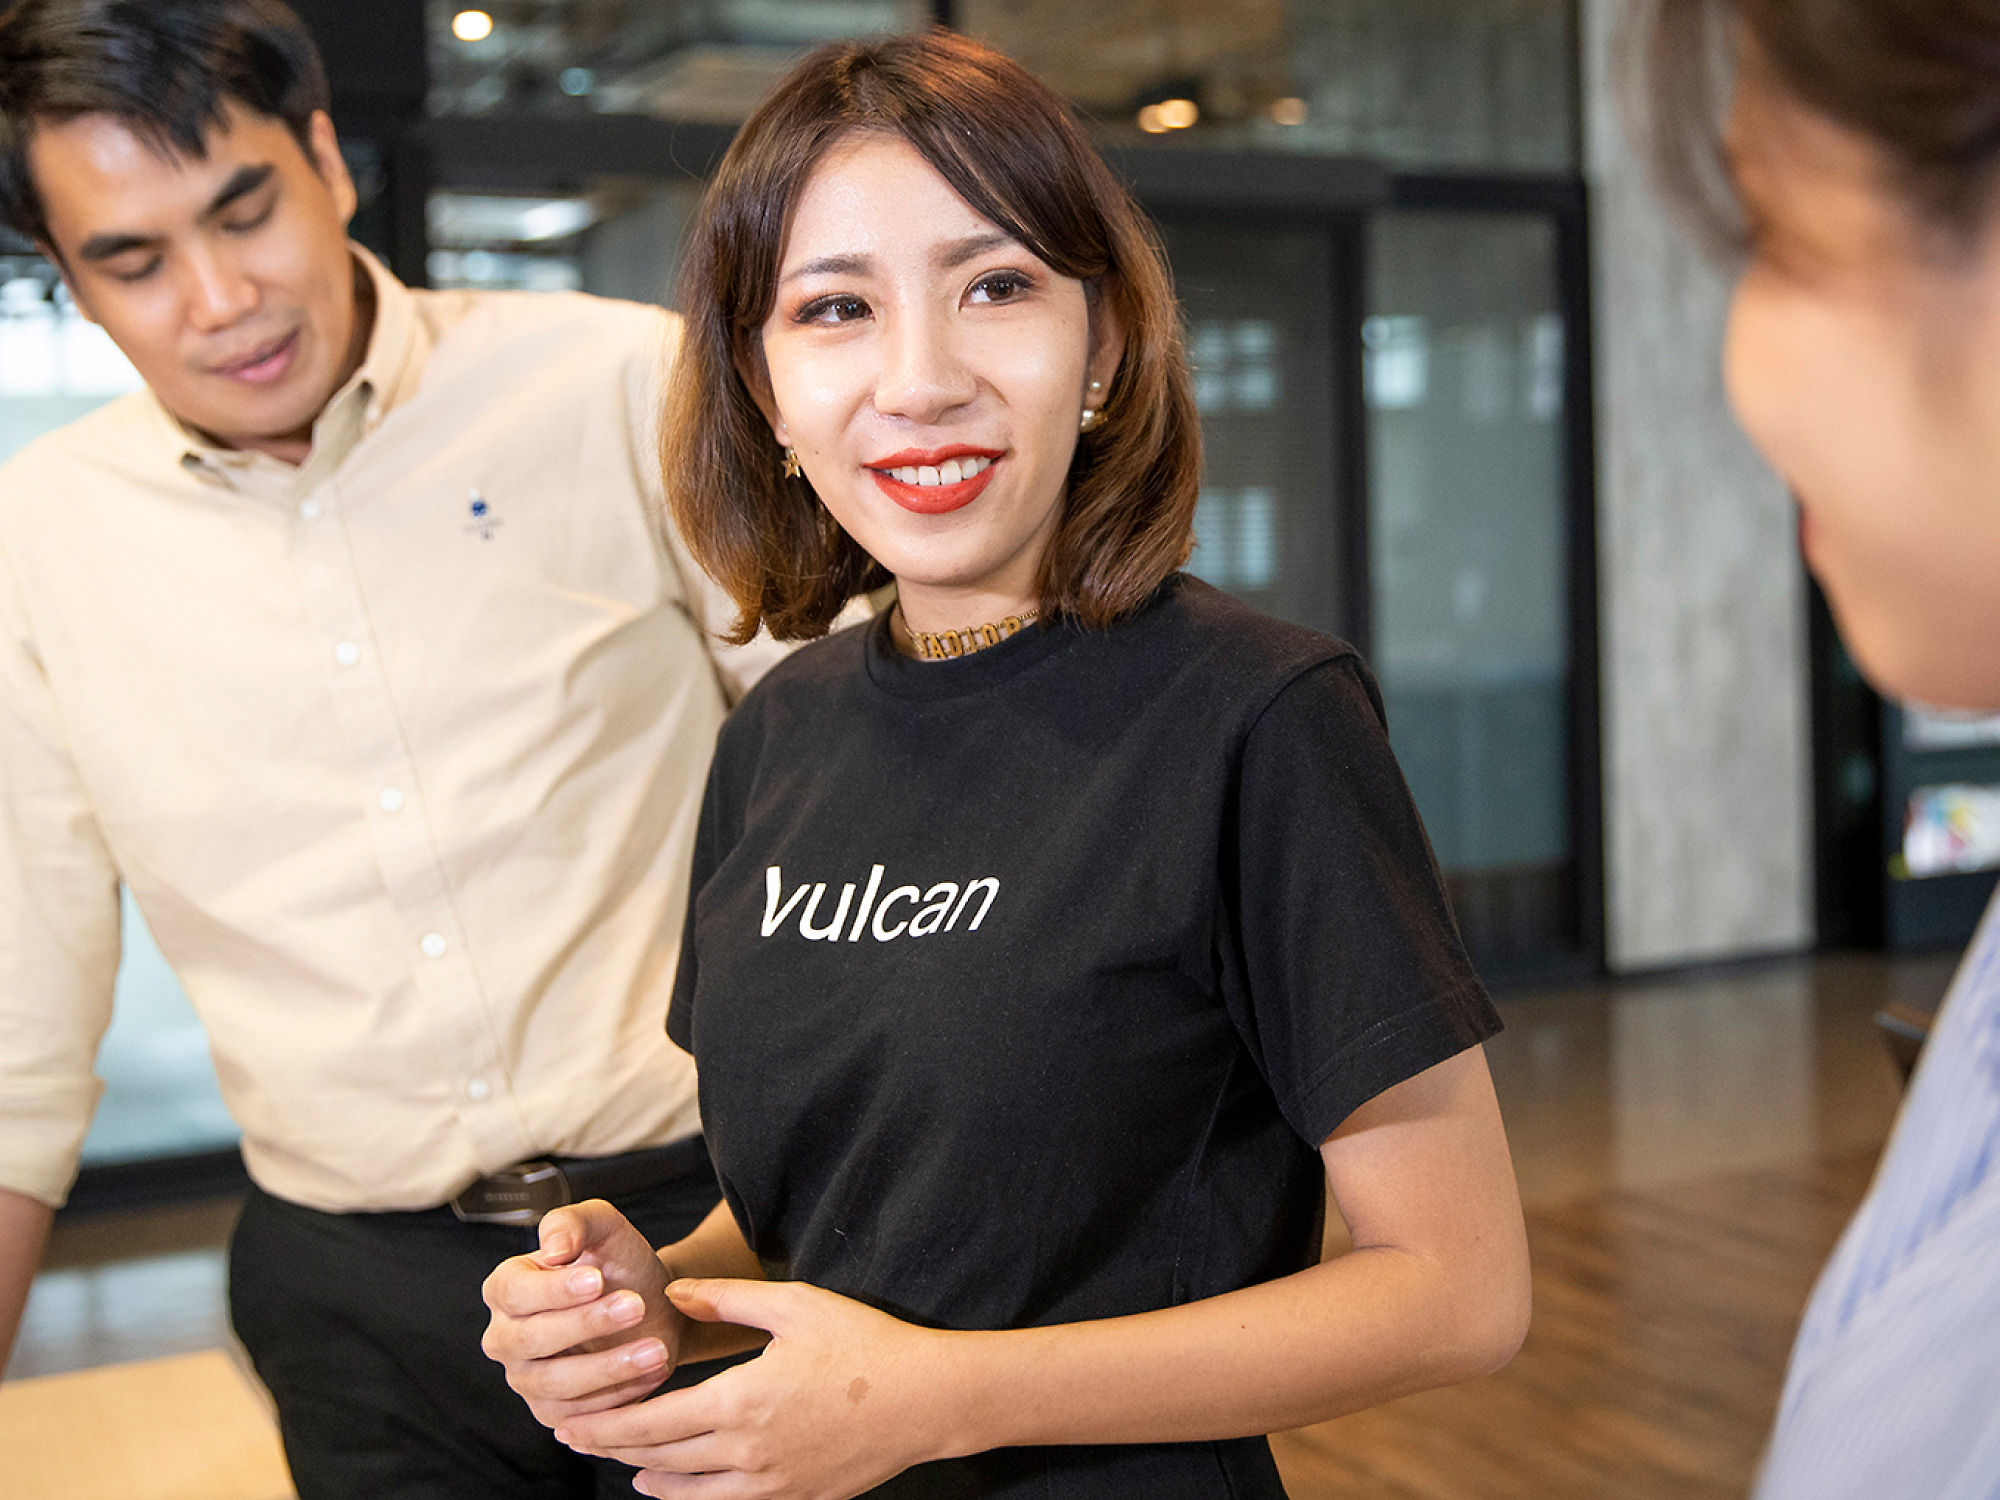 A young woman in black t-shirt labeled vulcan smiling at a coworker in a modern office setting, with another male colleague